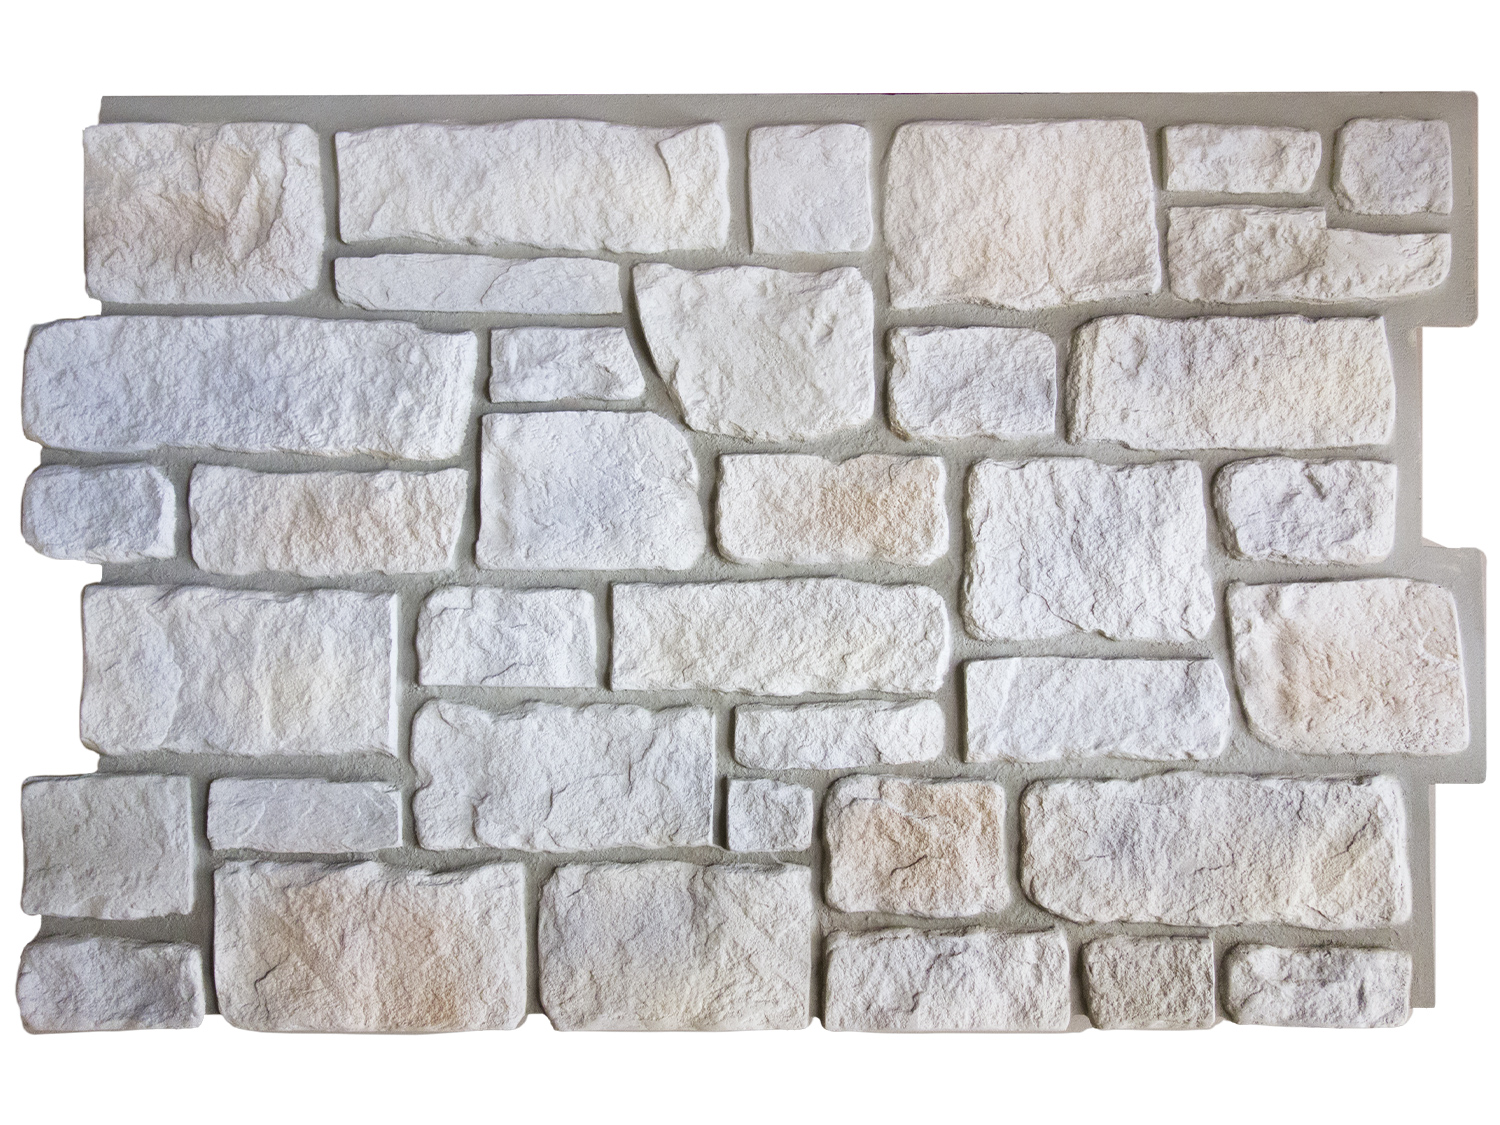 Can this faux stone be used as a backsplash behind a stove?